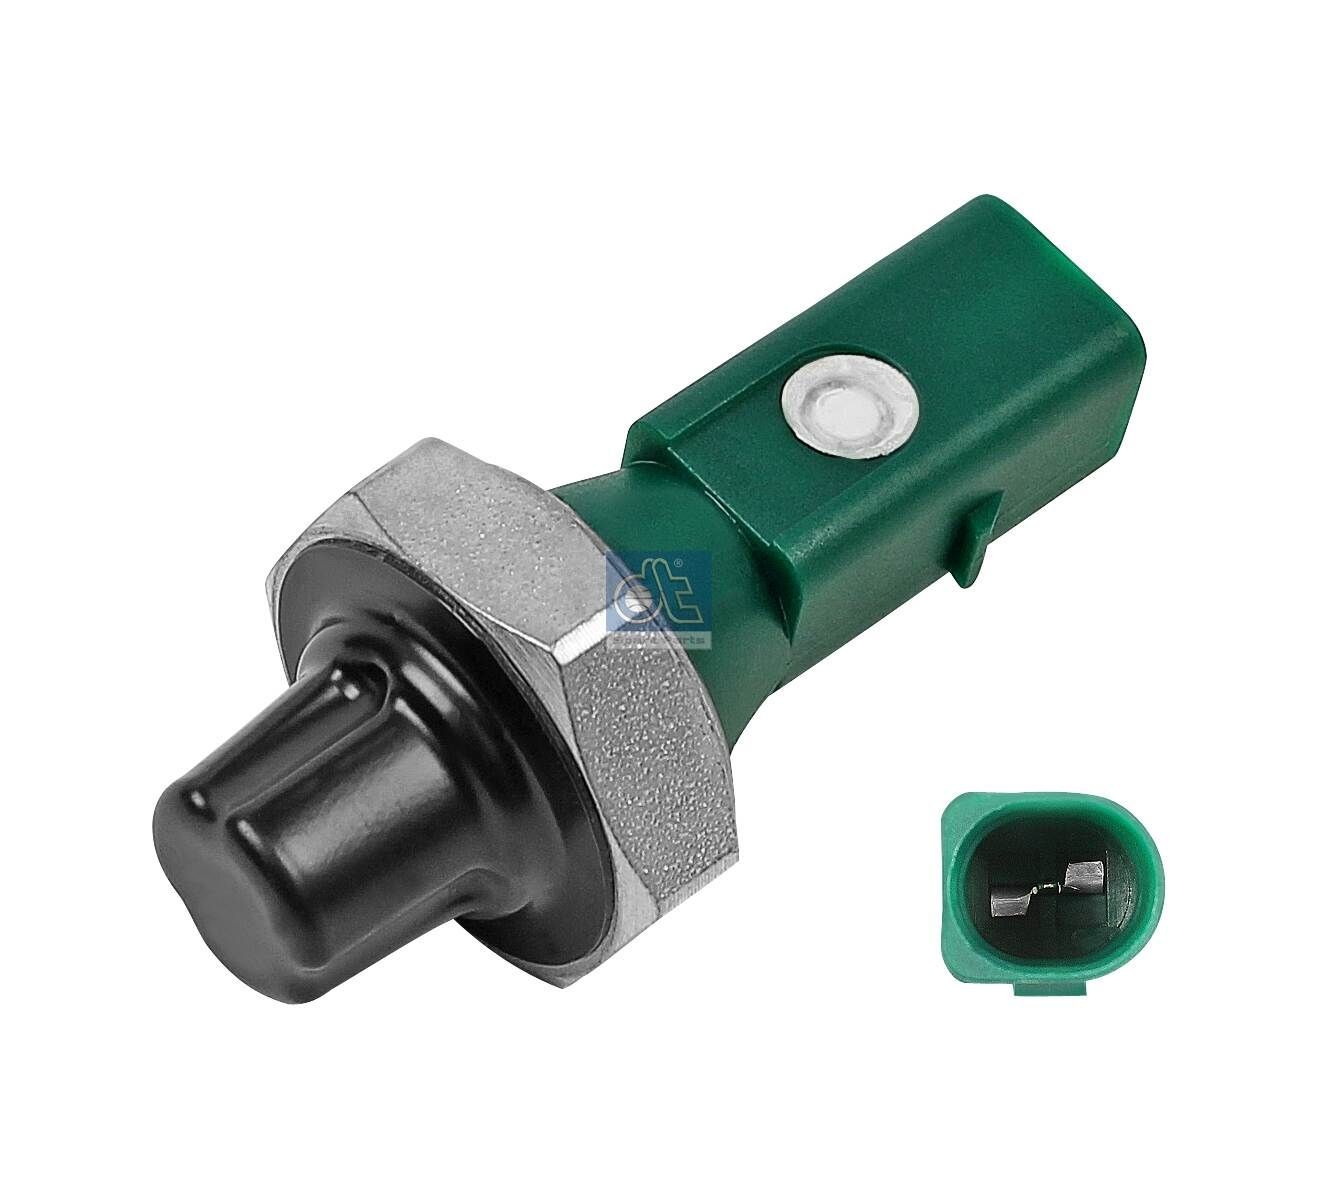 DT Spare Parts M10 x 1, 0,45 bar, 0,6 - 0,3 bar Oil Pressure Switch 11.80603 buy